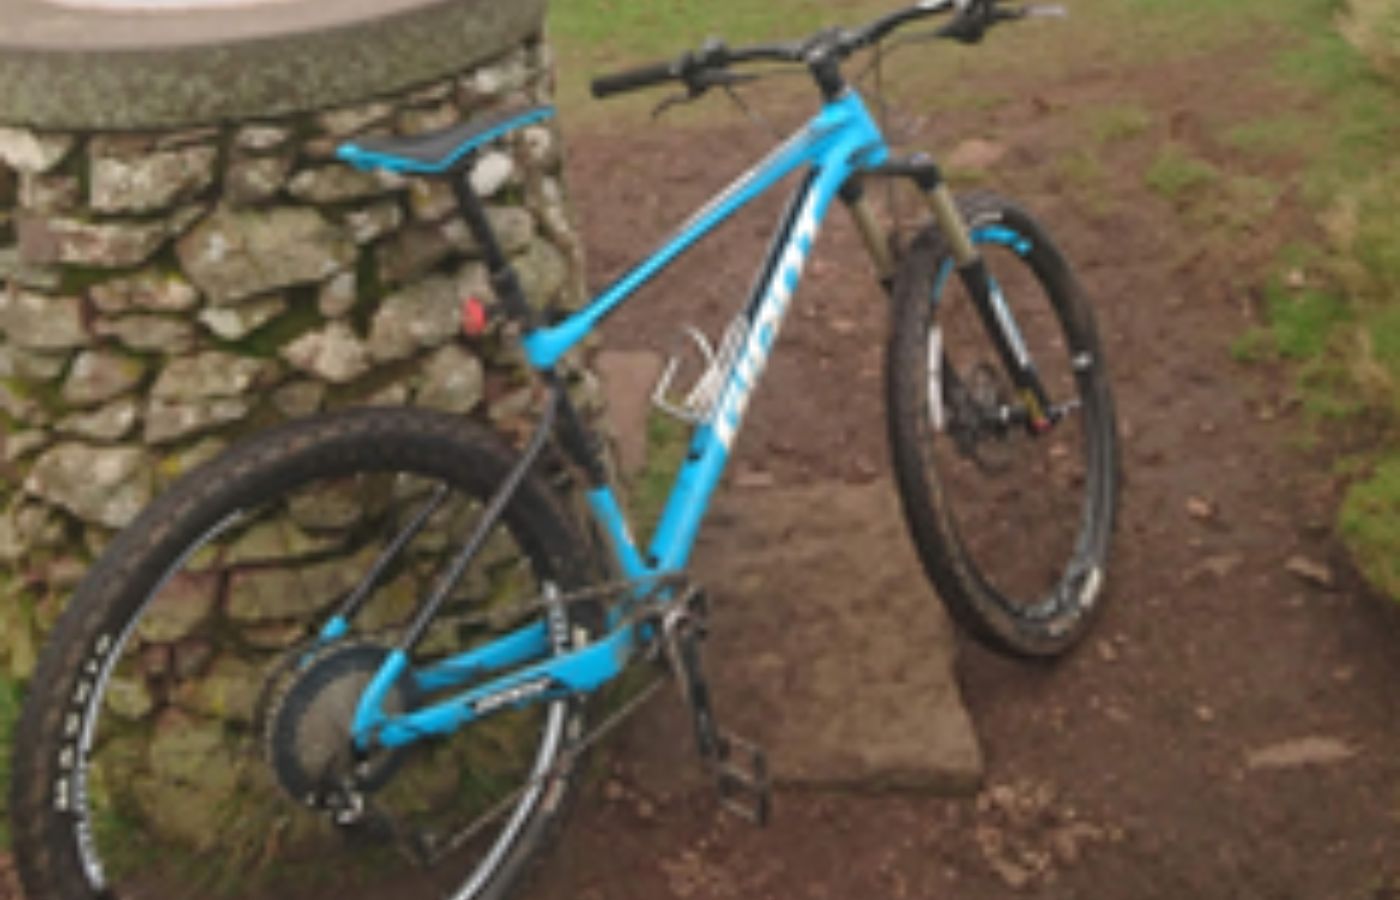 Police are investigating the theft of two bikes.